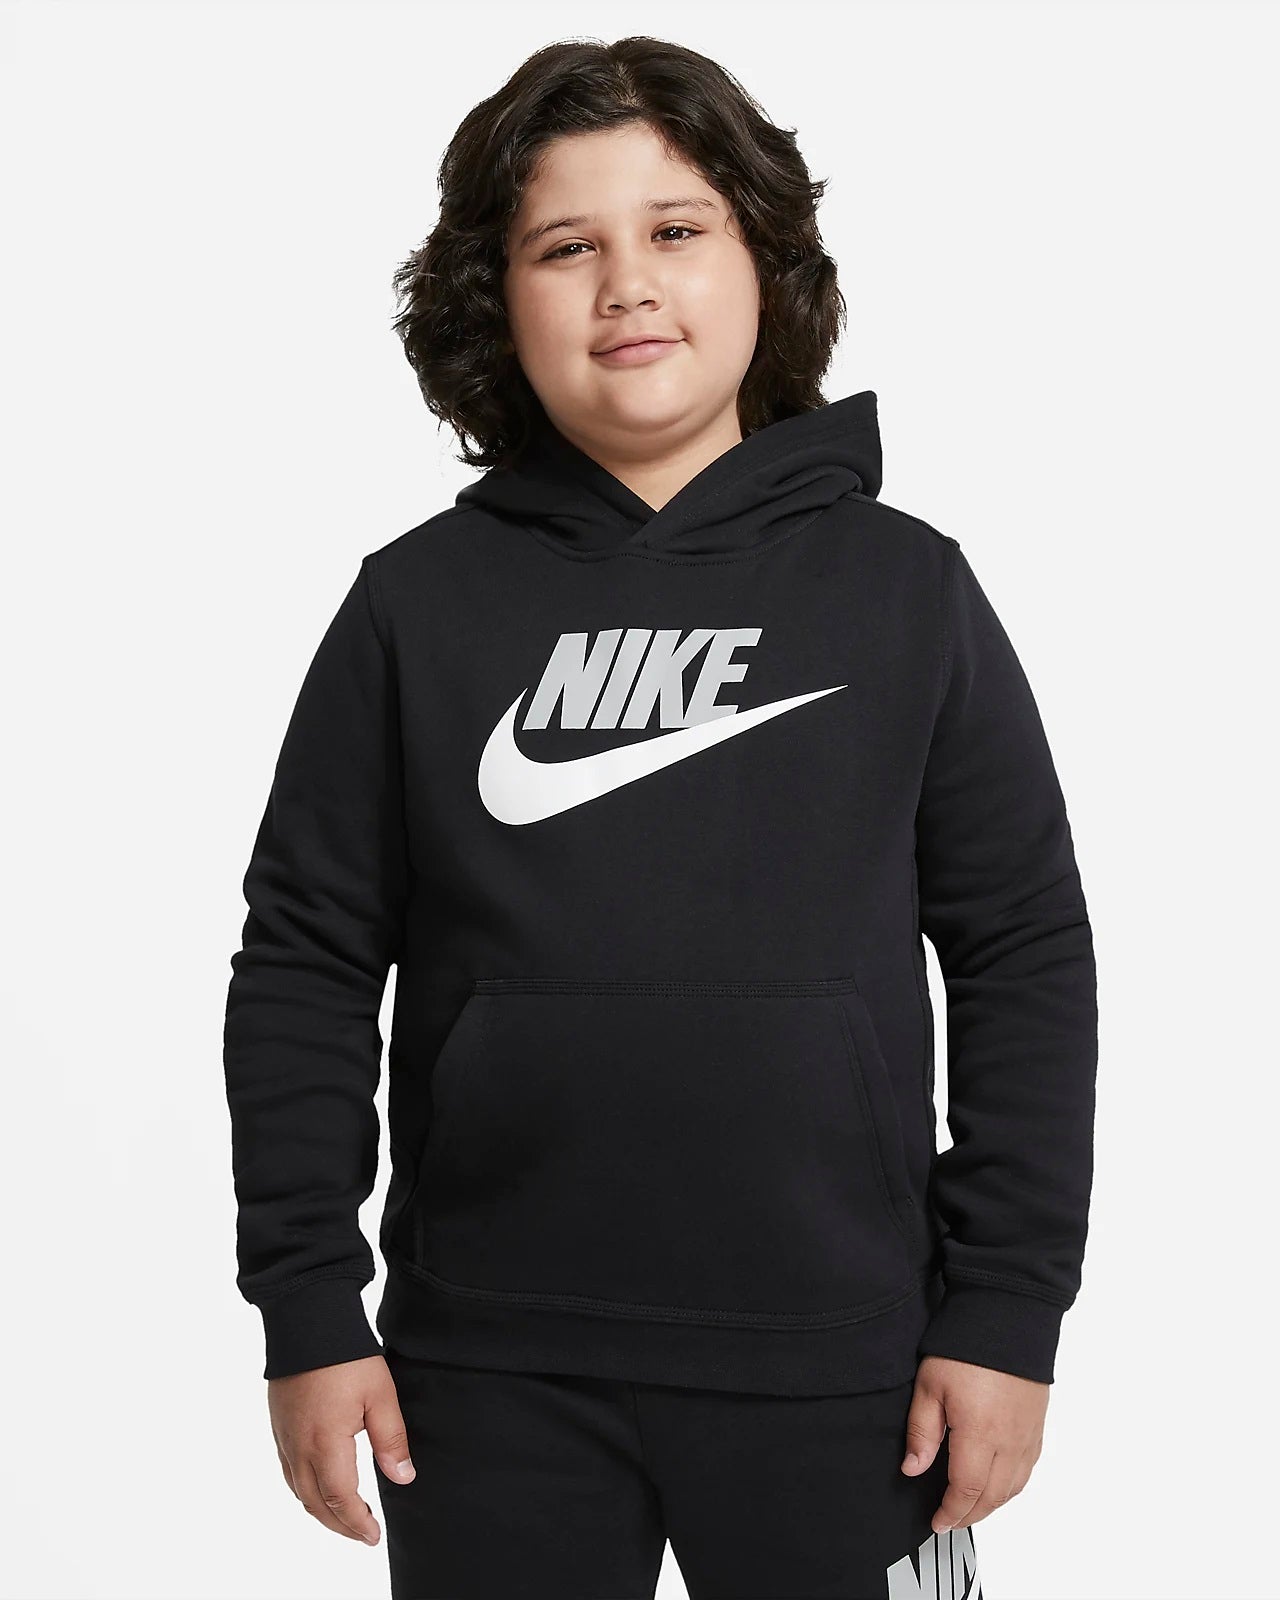 Boys Nike Hoodie (Youth Small Only)